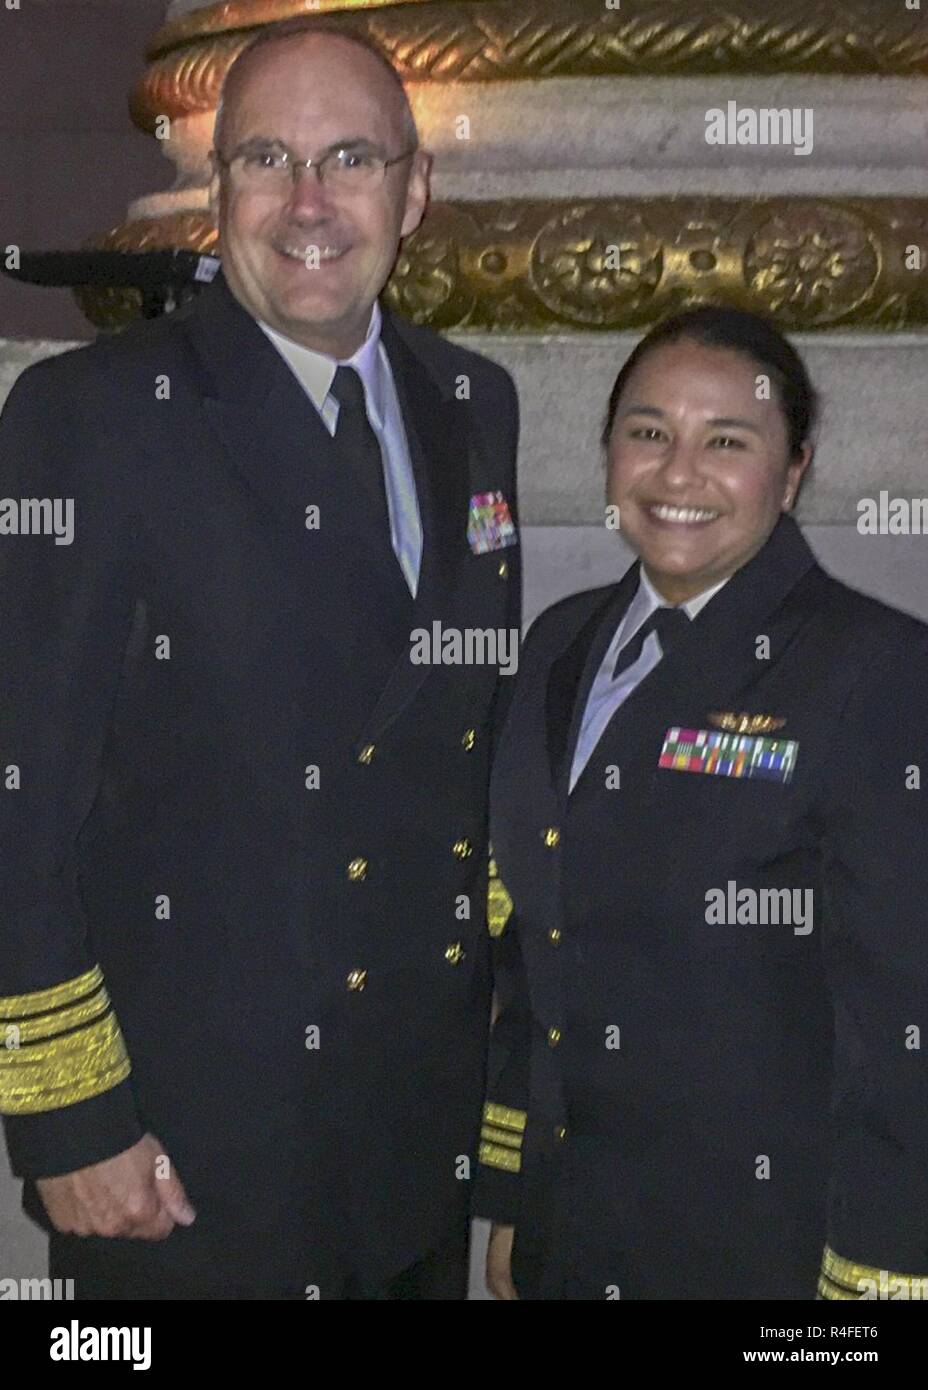 WASHINGTON (May 4, 2017) -- Vice Adm. Forrest Faison, Navy Surgeon General, left, poses for a photo with Lt. Cmdr. Tatana Olson, Heroes of Military Medicine (HMM) Award 2017 recipient during a reception at the Andrew W. Mellon Auditorium in Washington, D.C. HMM awards honor outstanding contributions by individuals who have distinguished themselves through excellence and selfless dedication to advancing military medicine. Stock Photo